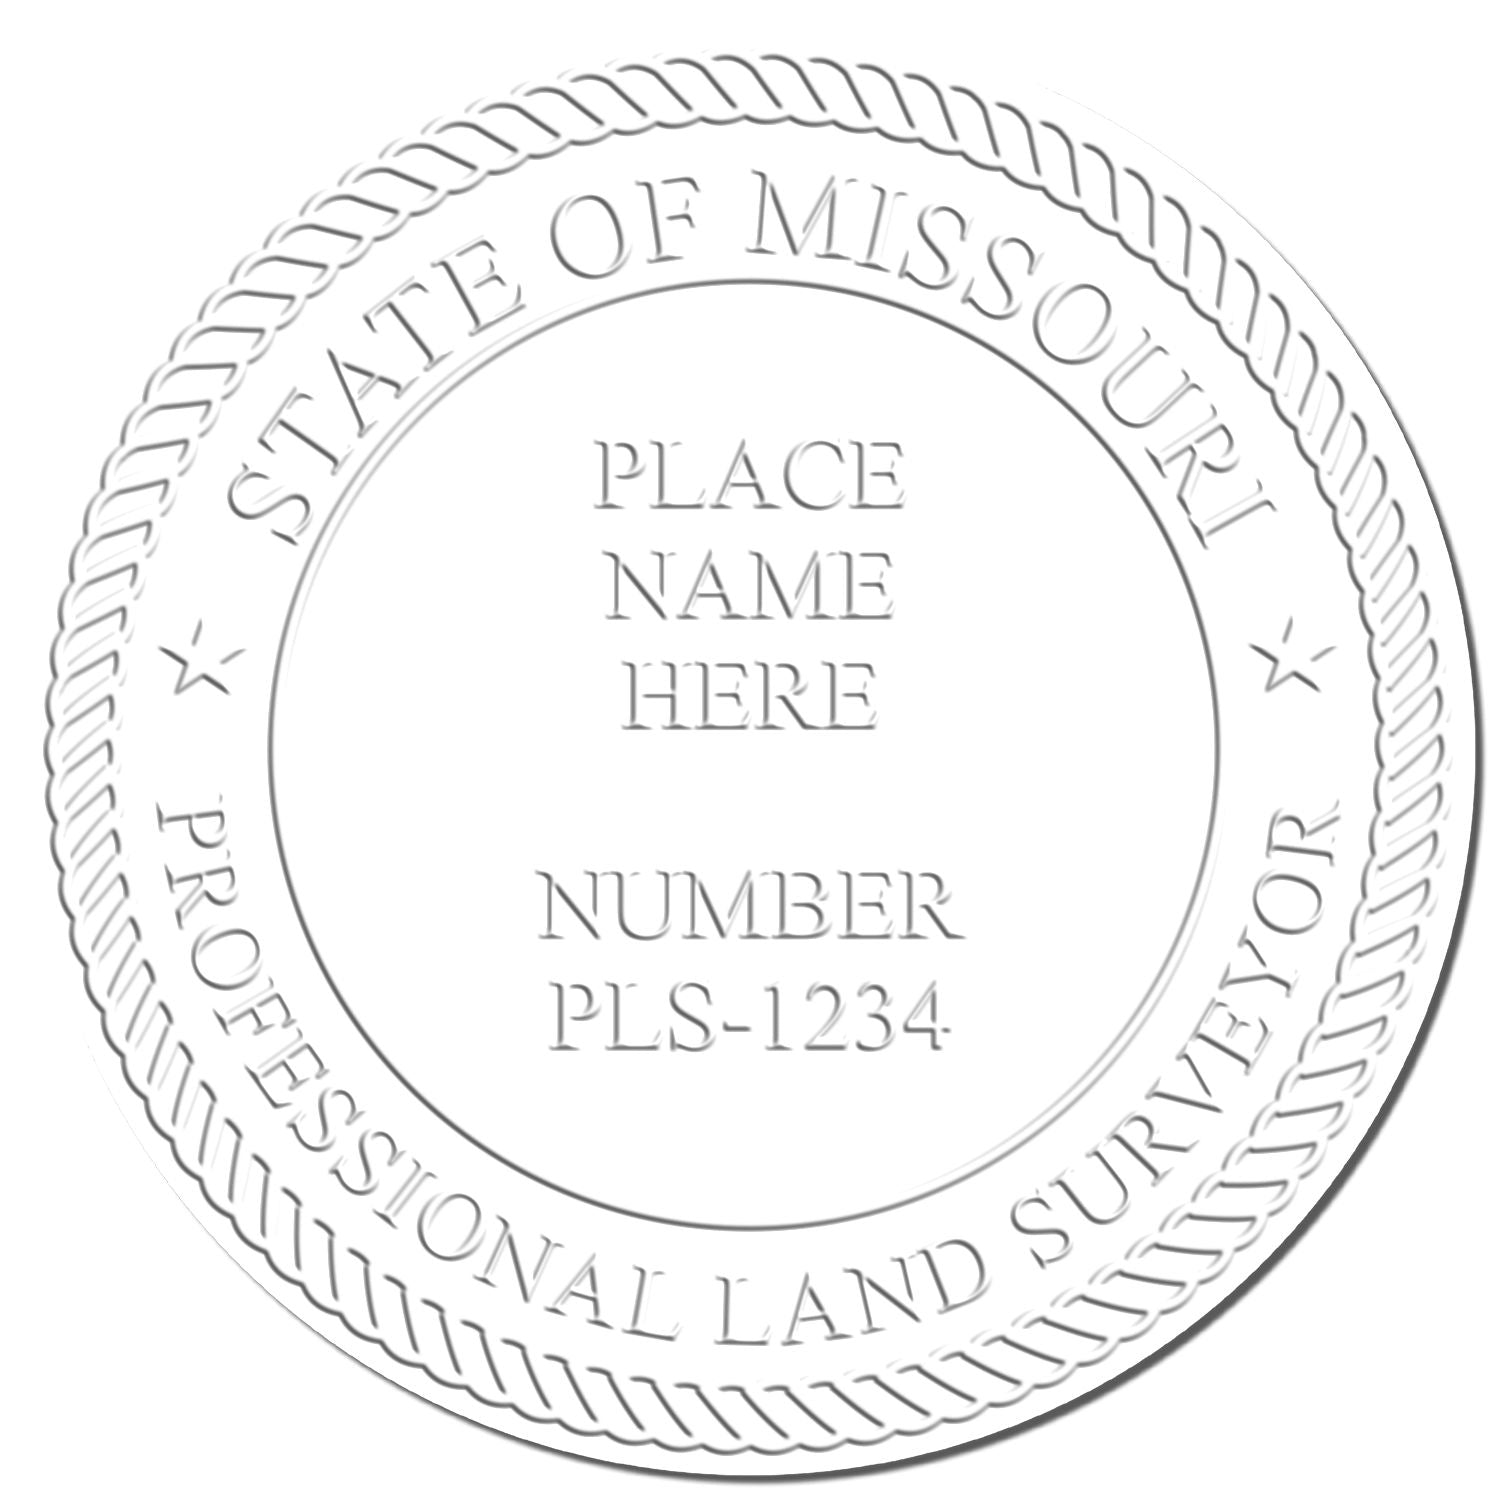 The main image for the Long Reach Missouri Land Surveyor Seal depicting a sample of the imprint and electronic files